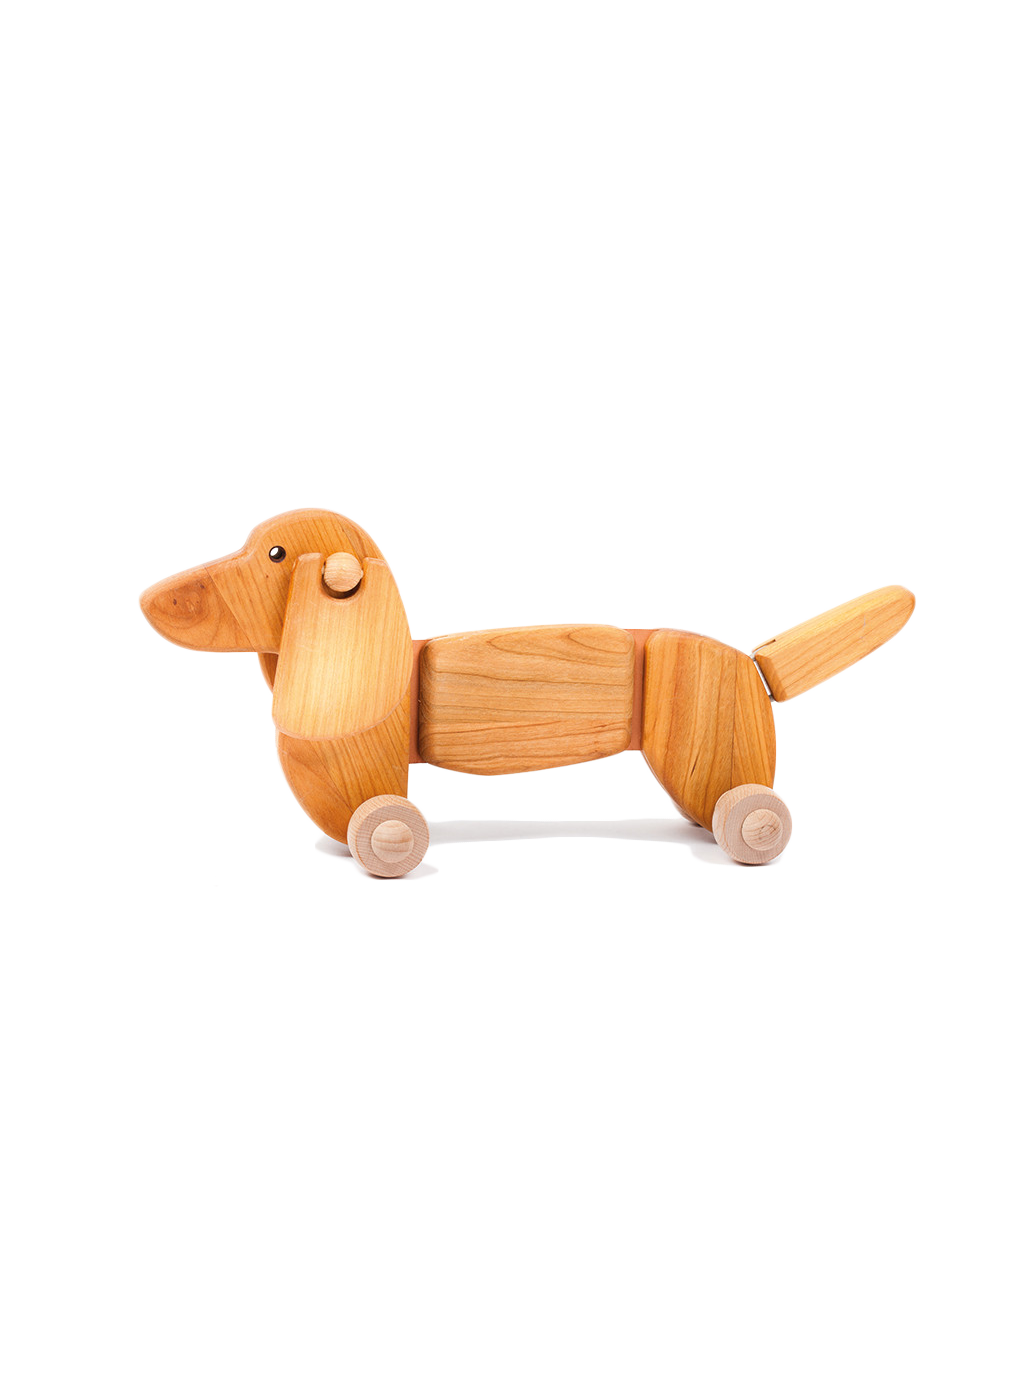 wooden dachshund to be pulled on a string Dachshund